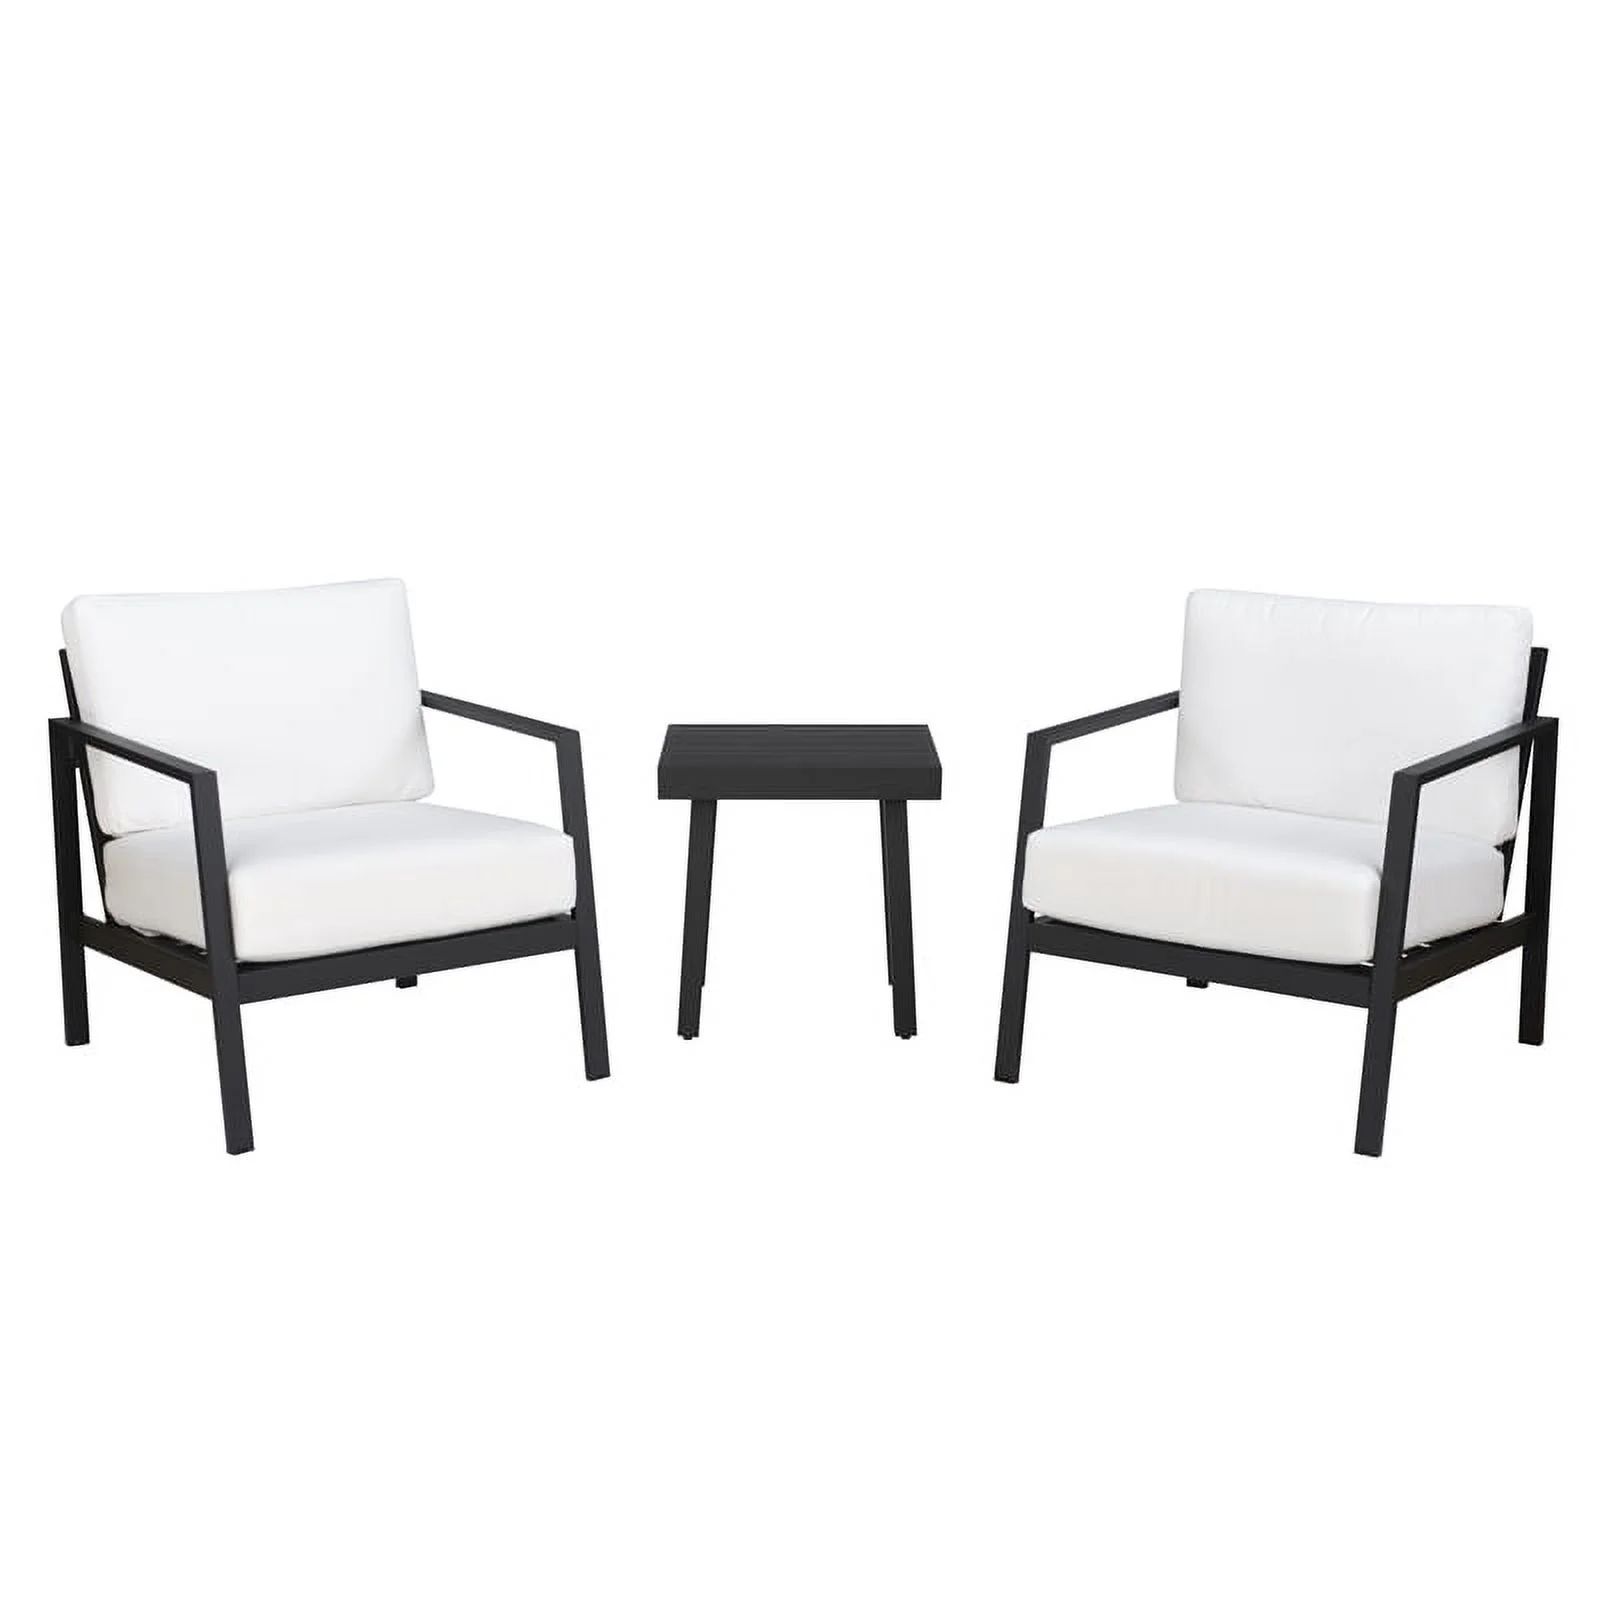 Linon Turner 3 Piece Outdoor Chair & Table Set White Cushions in Black Aluminum | Walmart (US)